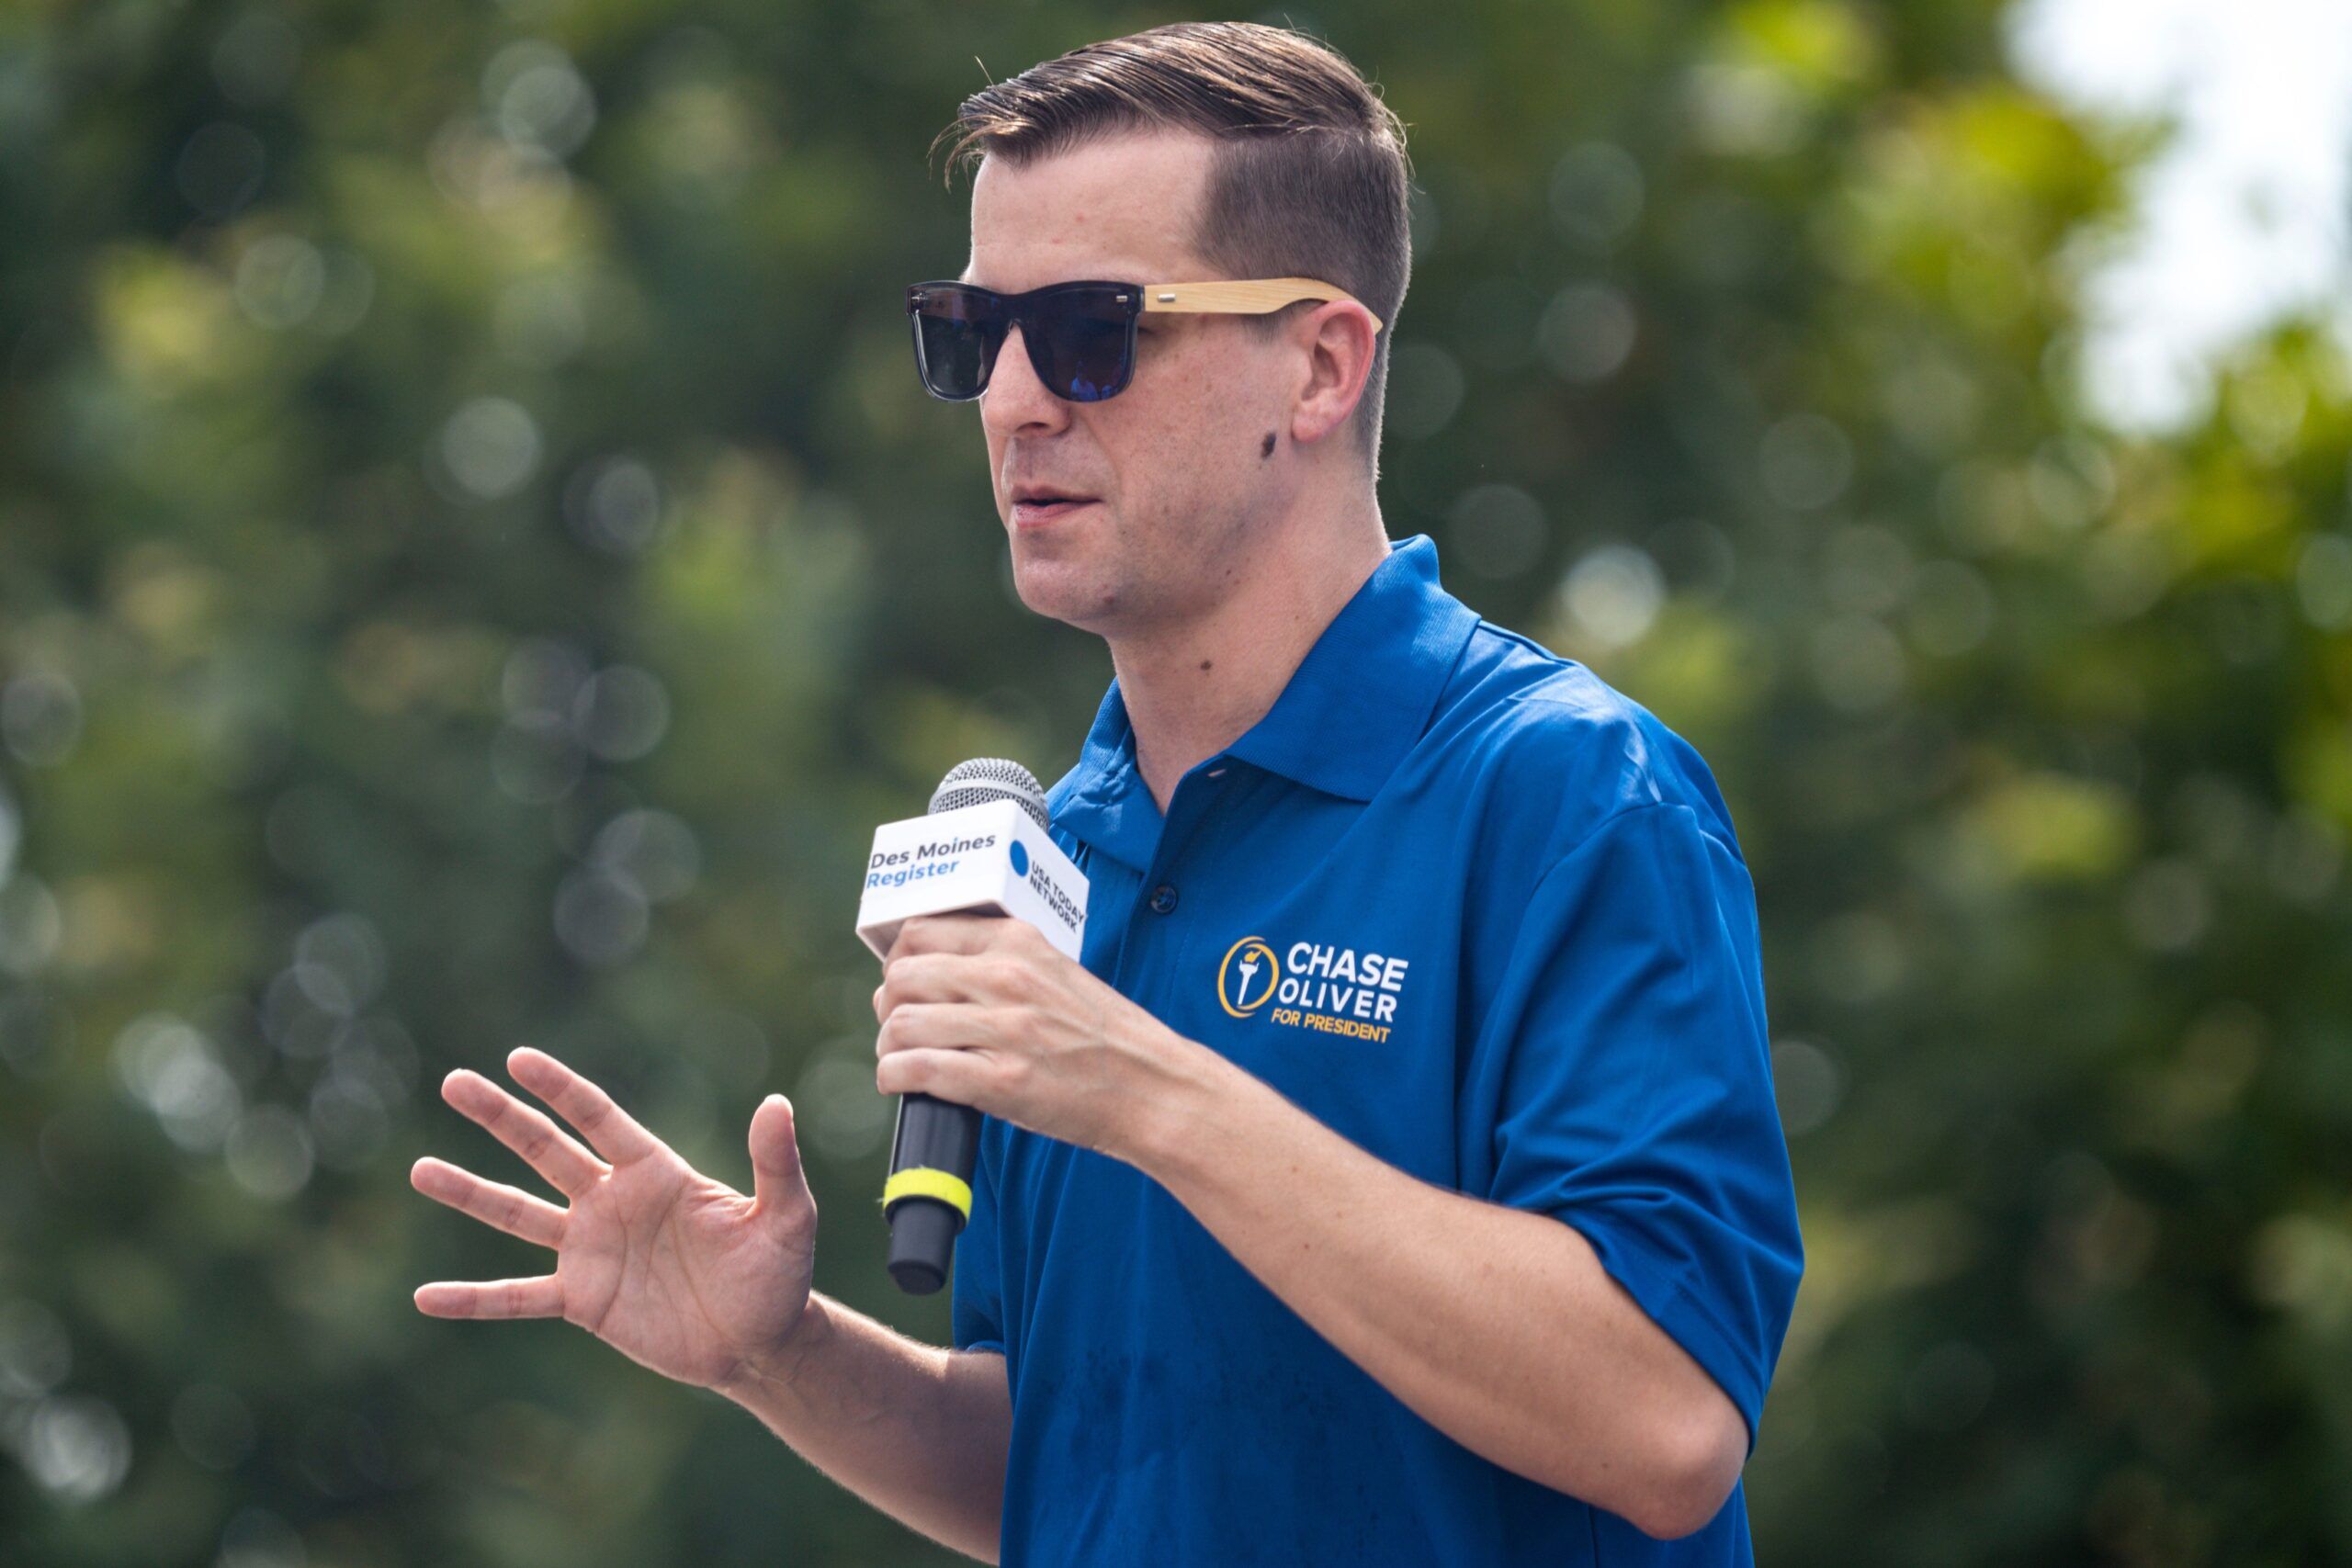 Libertarian presidential candidate Chase Oliver speaks at the Des Moines Register Political Soapbox during day 10 of the Iowa State on Saturday, August 19, 2023 in Des Moines.